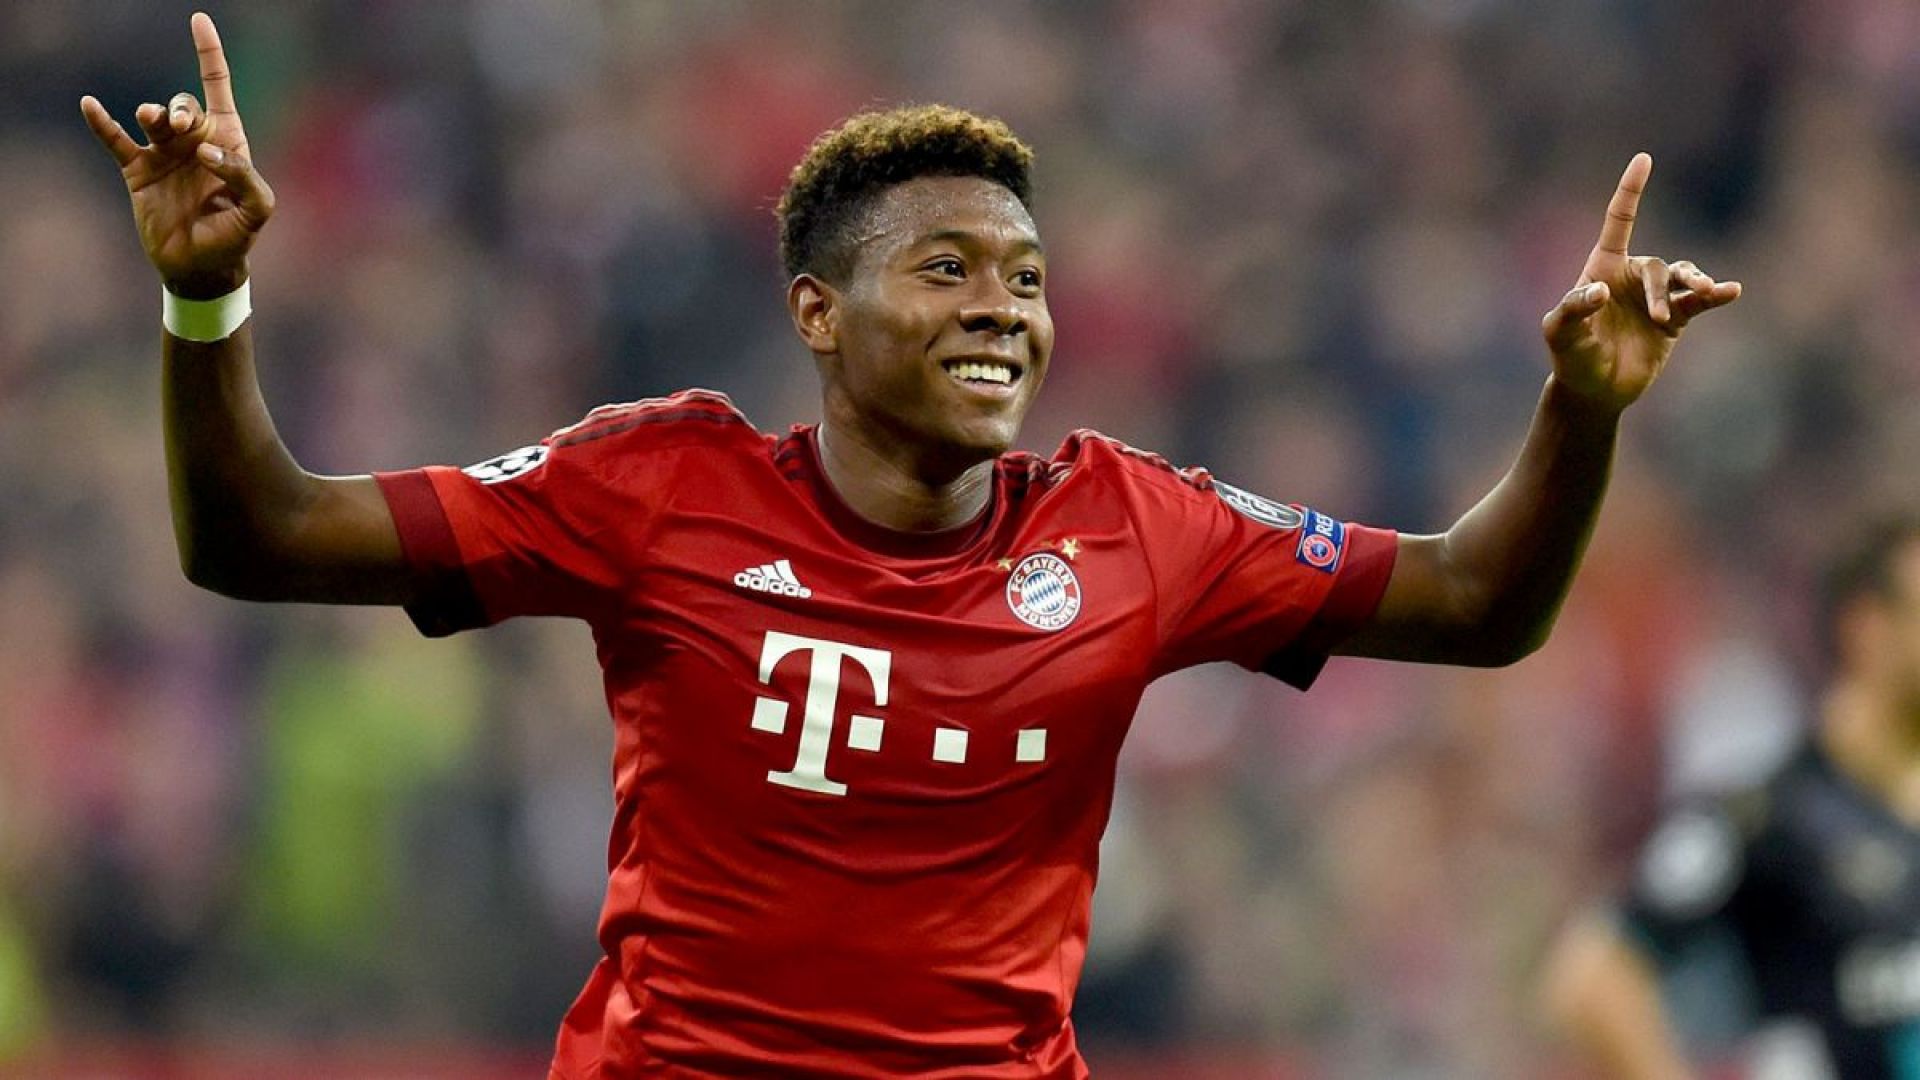 Manchester United given a boost in their pursuit of David Alaba after his negotiations with Real Madrid fail to lead anywhere.